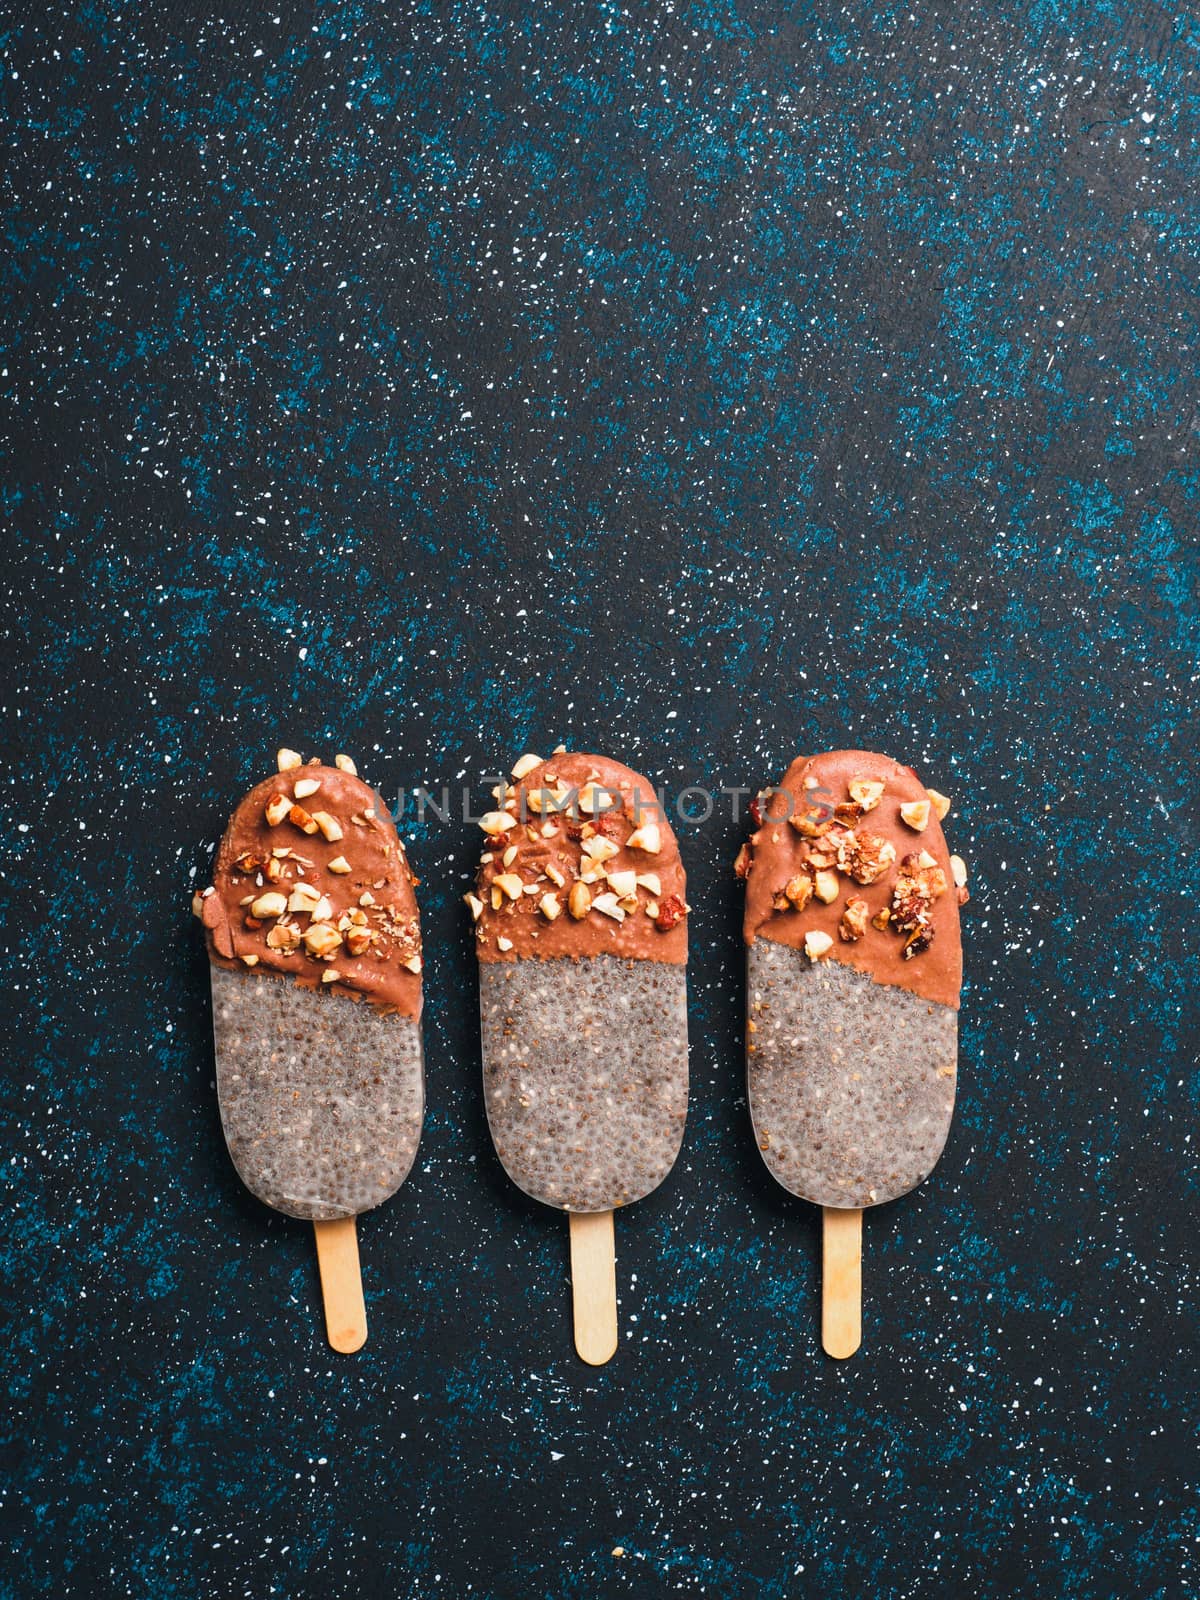 Chia popsicle with chocolate and nuts on blue background. Healthy recipe and idea homemade vegan popsicle ice cream. Easter dessert idea. Copy space for text. Top view or flat-lay. Vertical.